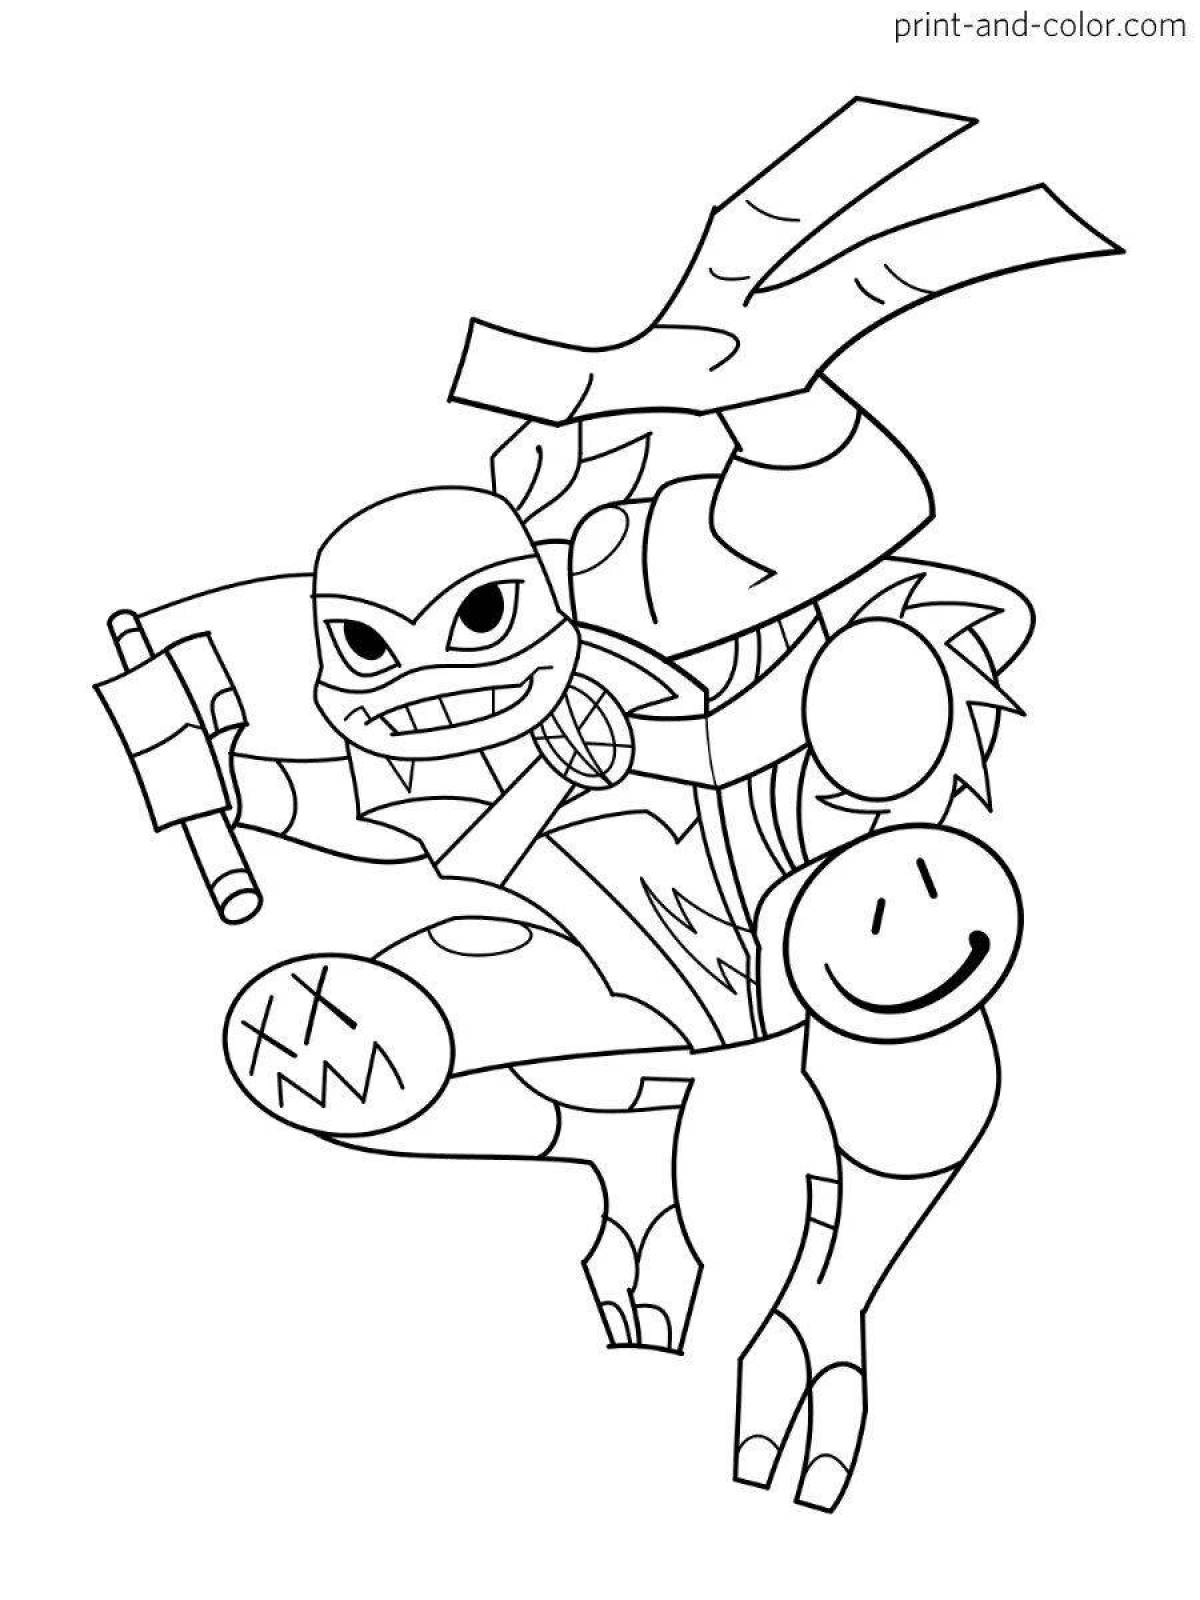 The evolution of the dazzling ninja turtles coloring page